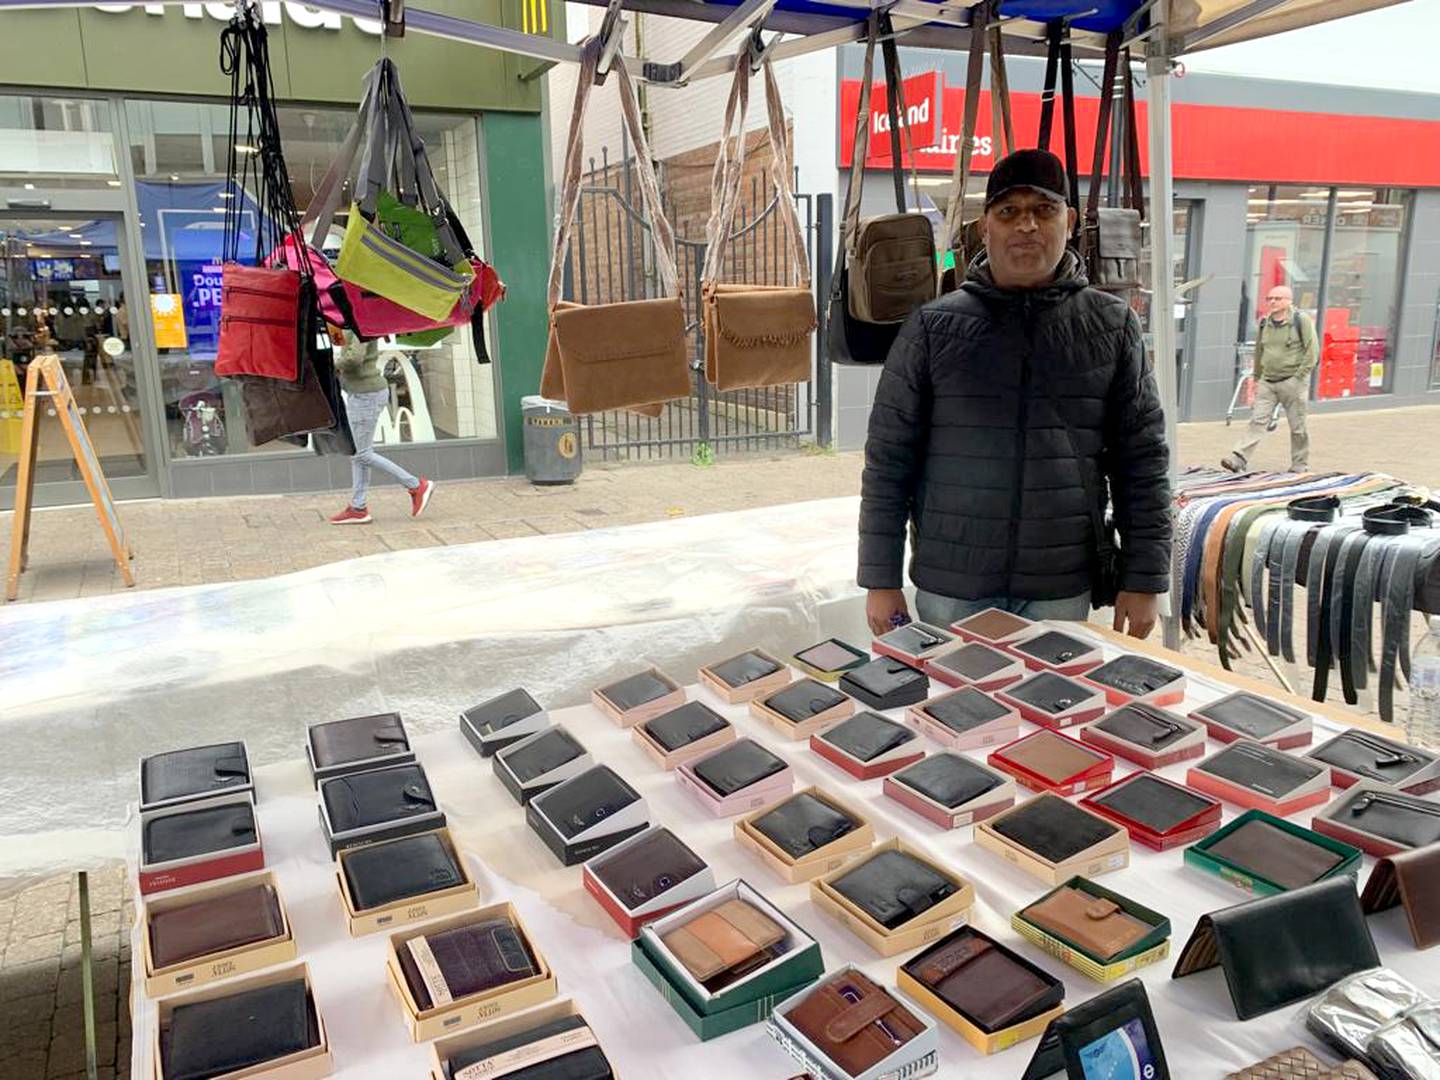 Staines stallholder Ali Ahmed said he was more concerned about the cost-of living crisis than his MP's departure. Laura O’Callaghan / The National